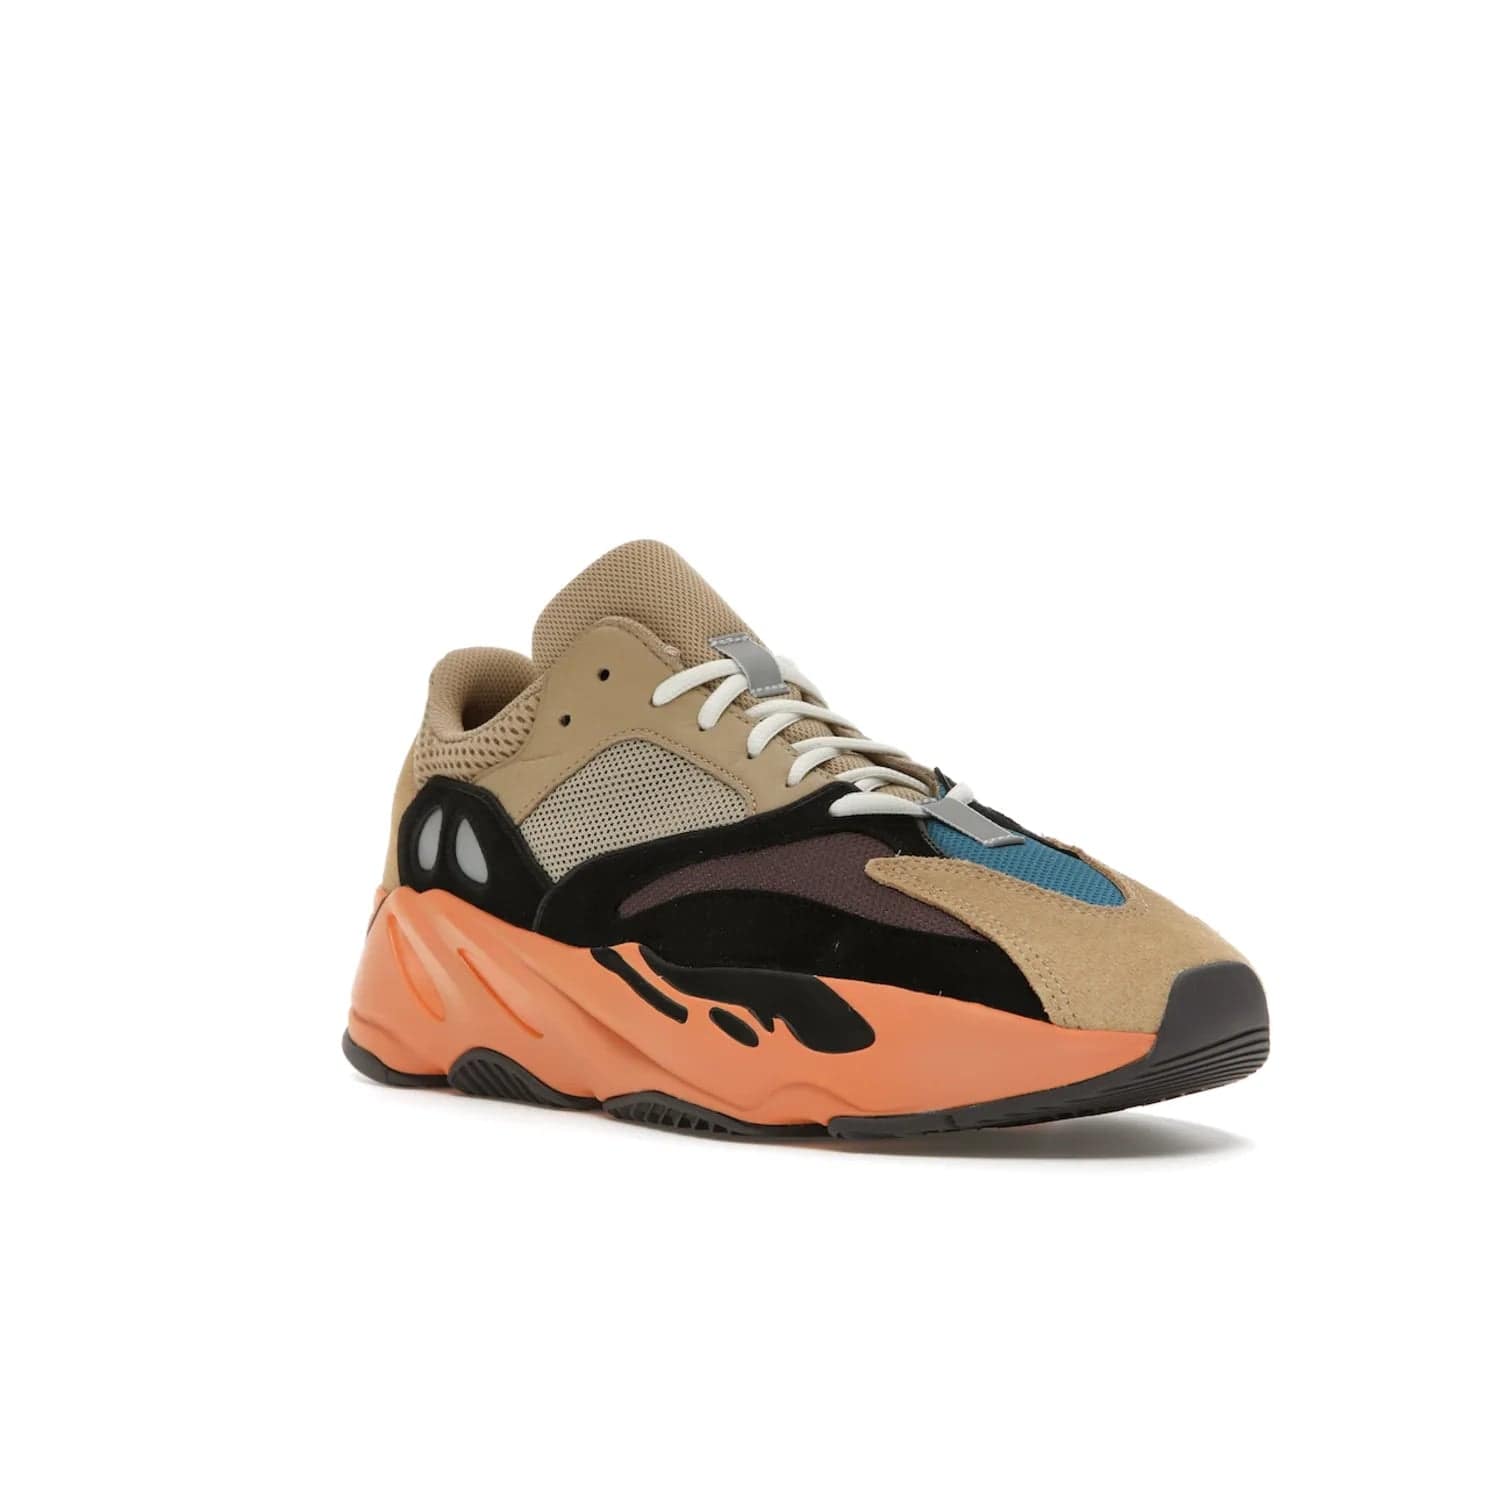 adidas Yeezy Boost 700 Enflame Amber - Image 6 - Only at www.BallersClubKickz.com - Adidas Yeezy Boost 700 Enflame Amber: Eye-catching design with pale yellow, brown, teal, and orange! Get yours in June 2021.